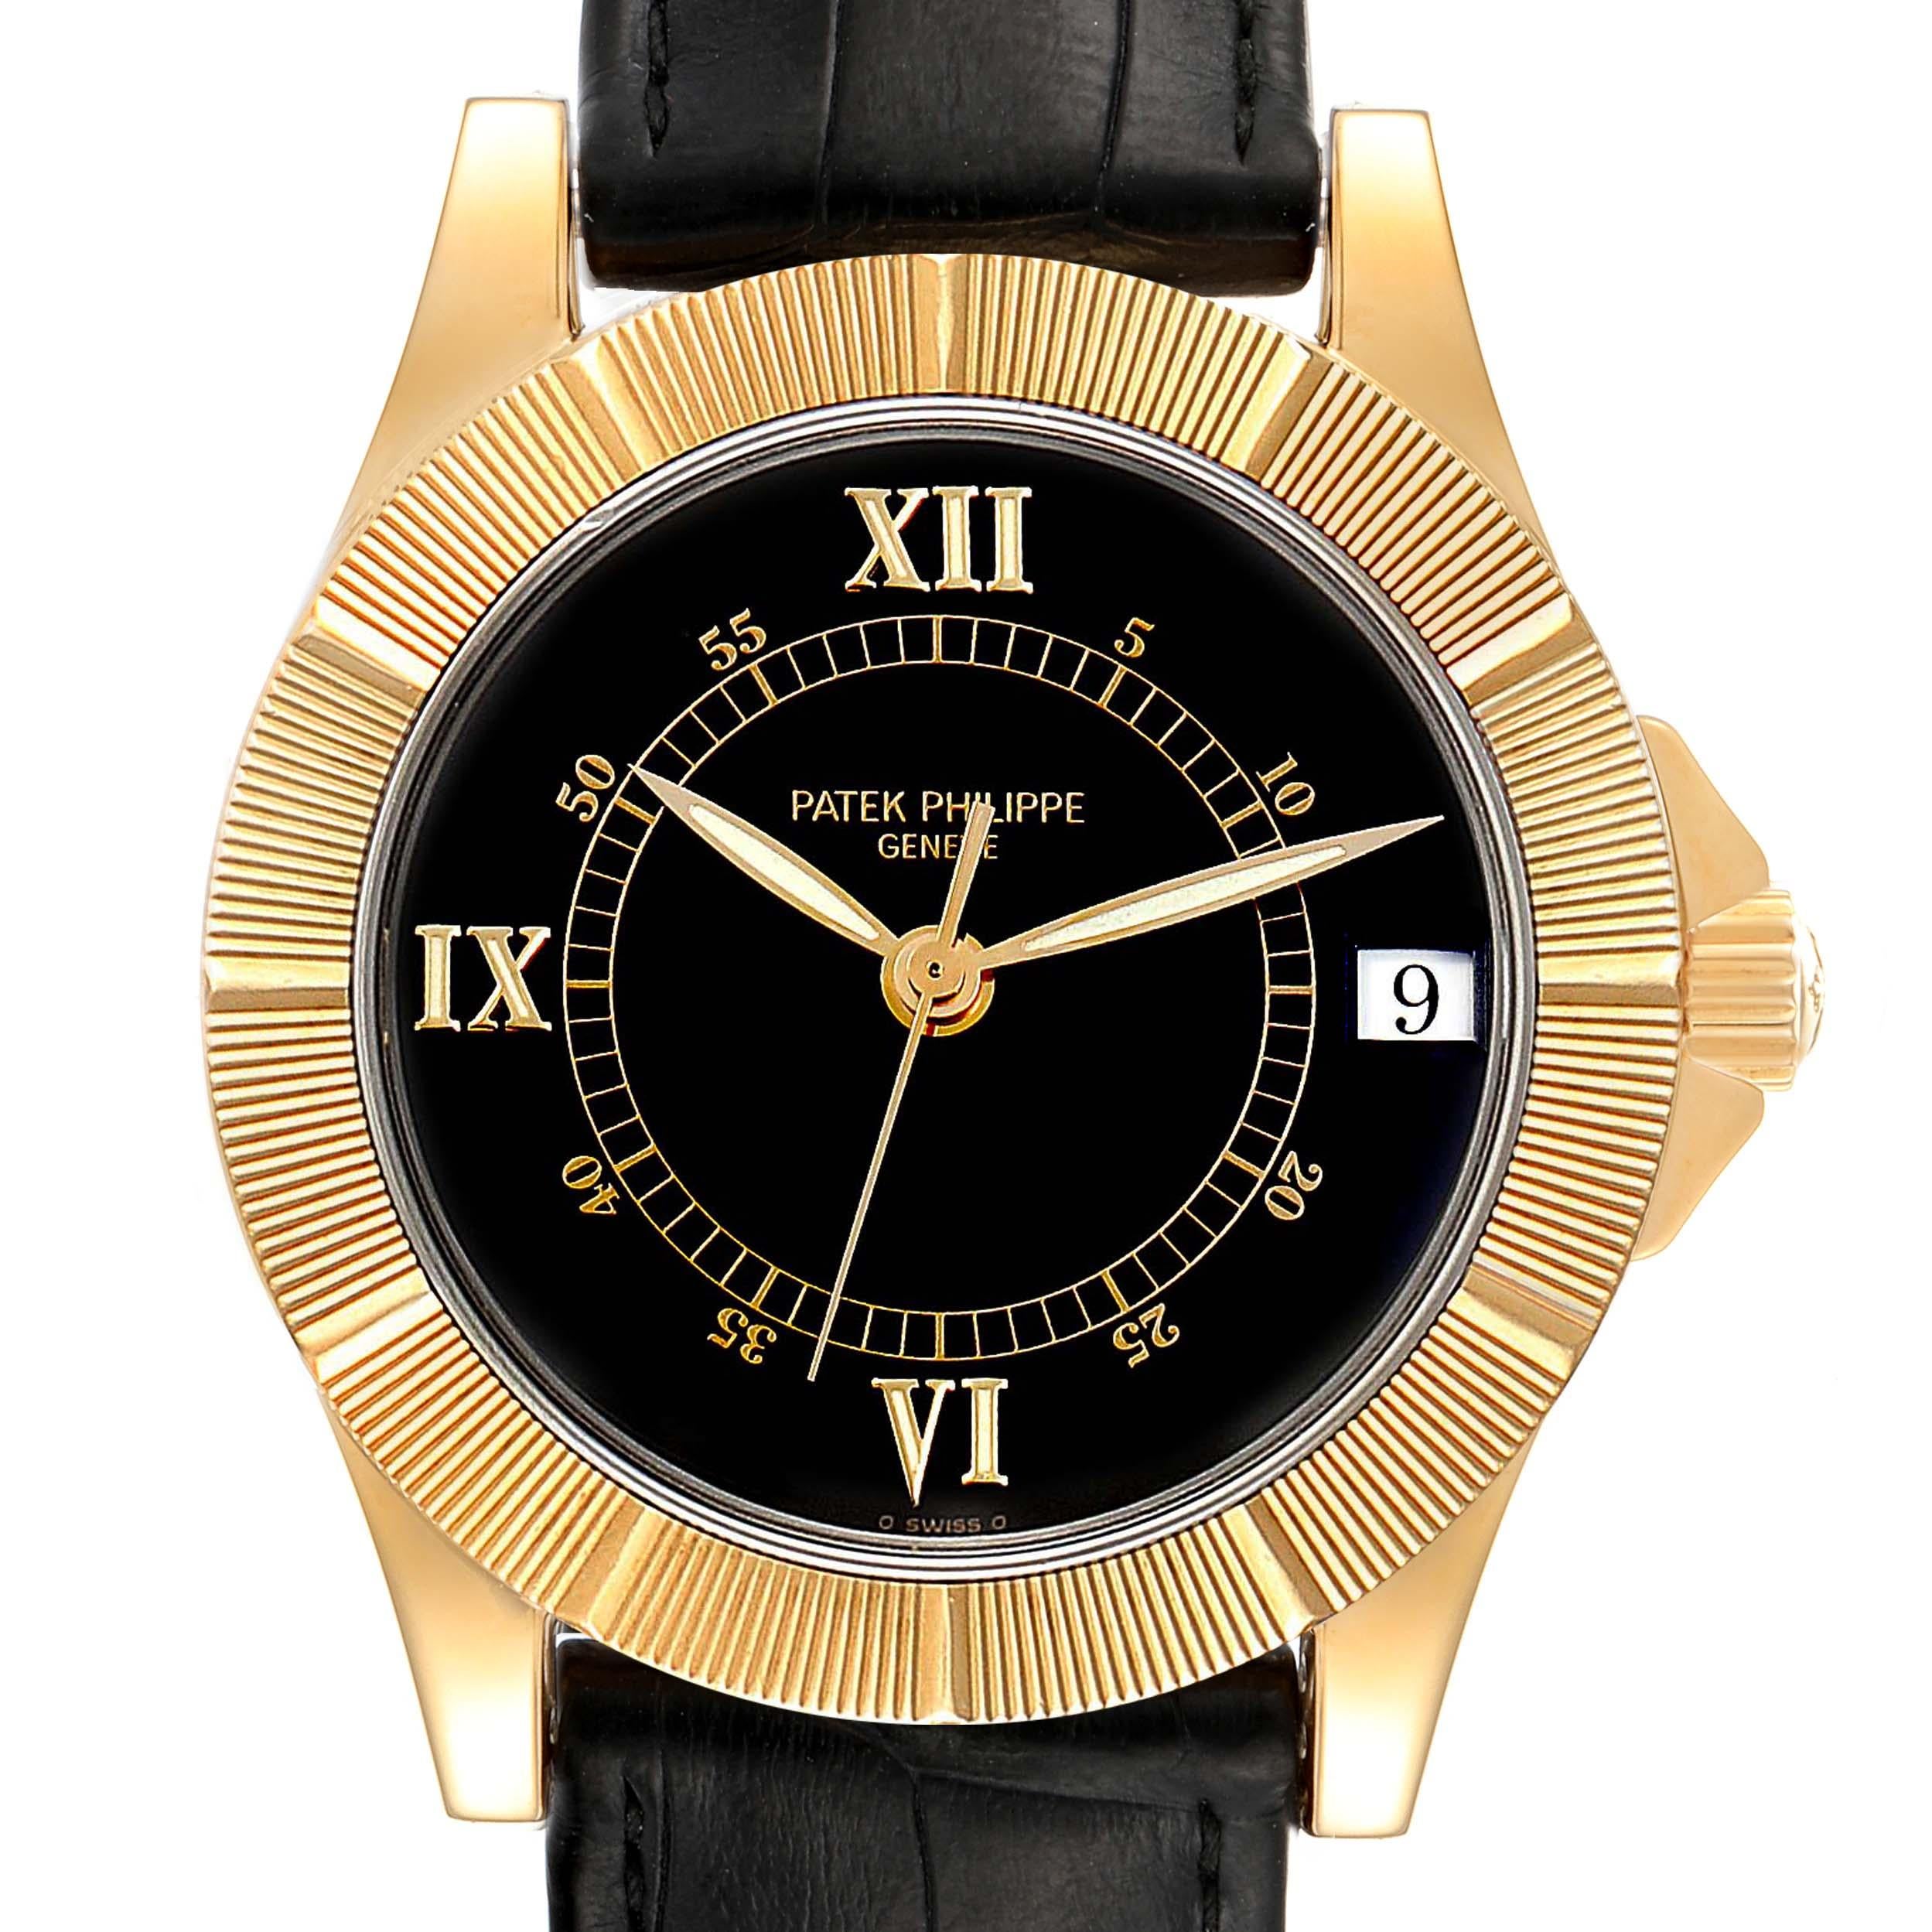 Patek Philippe Neptune Black Dial 18k Yellow Gold Mens Watch 5081. Automatic self-winding movement. Self-compensating balance spring, solid gold rotor, 48 hour power reserve and engraved with the Geneva Seal. 18k yellow gold round case 36.0 mm in